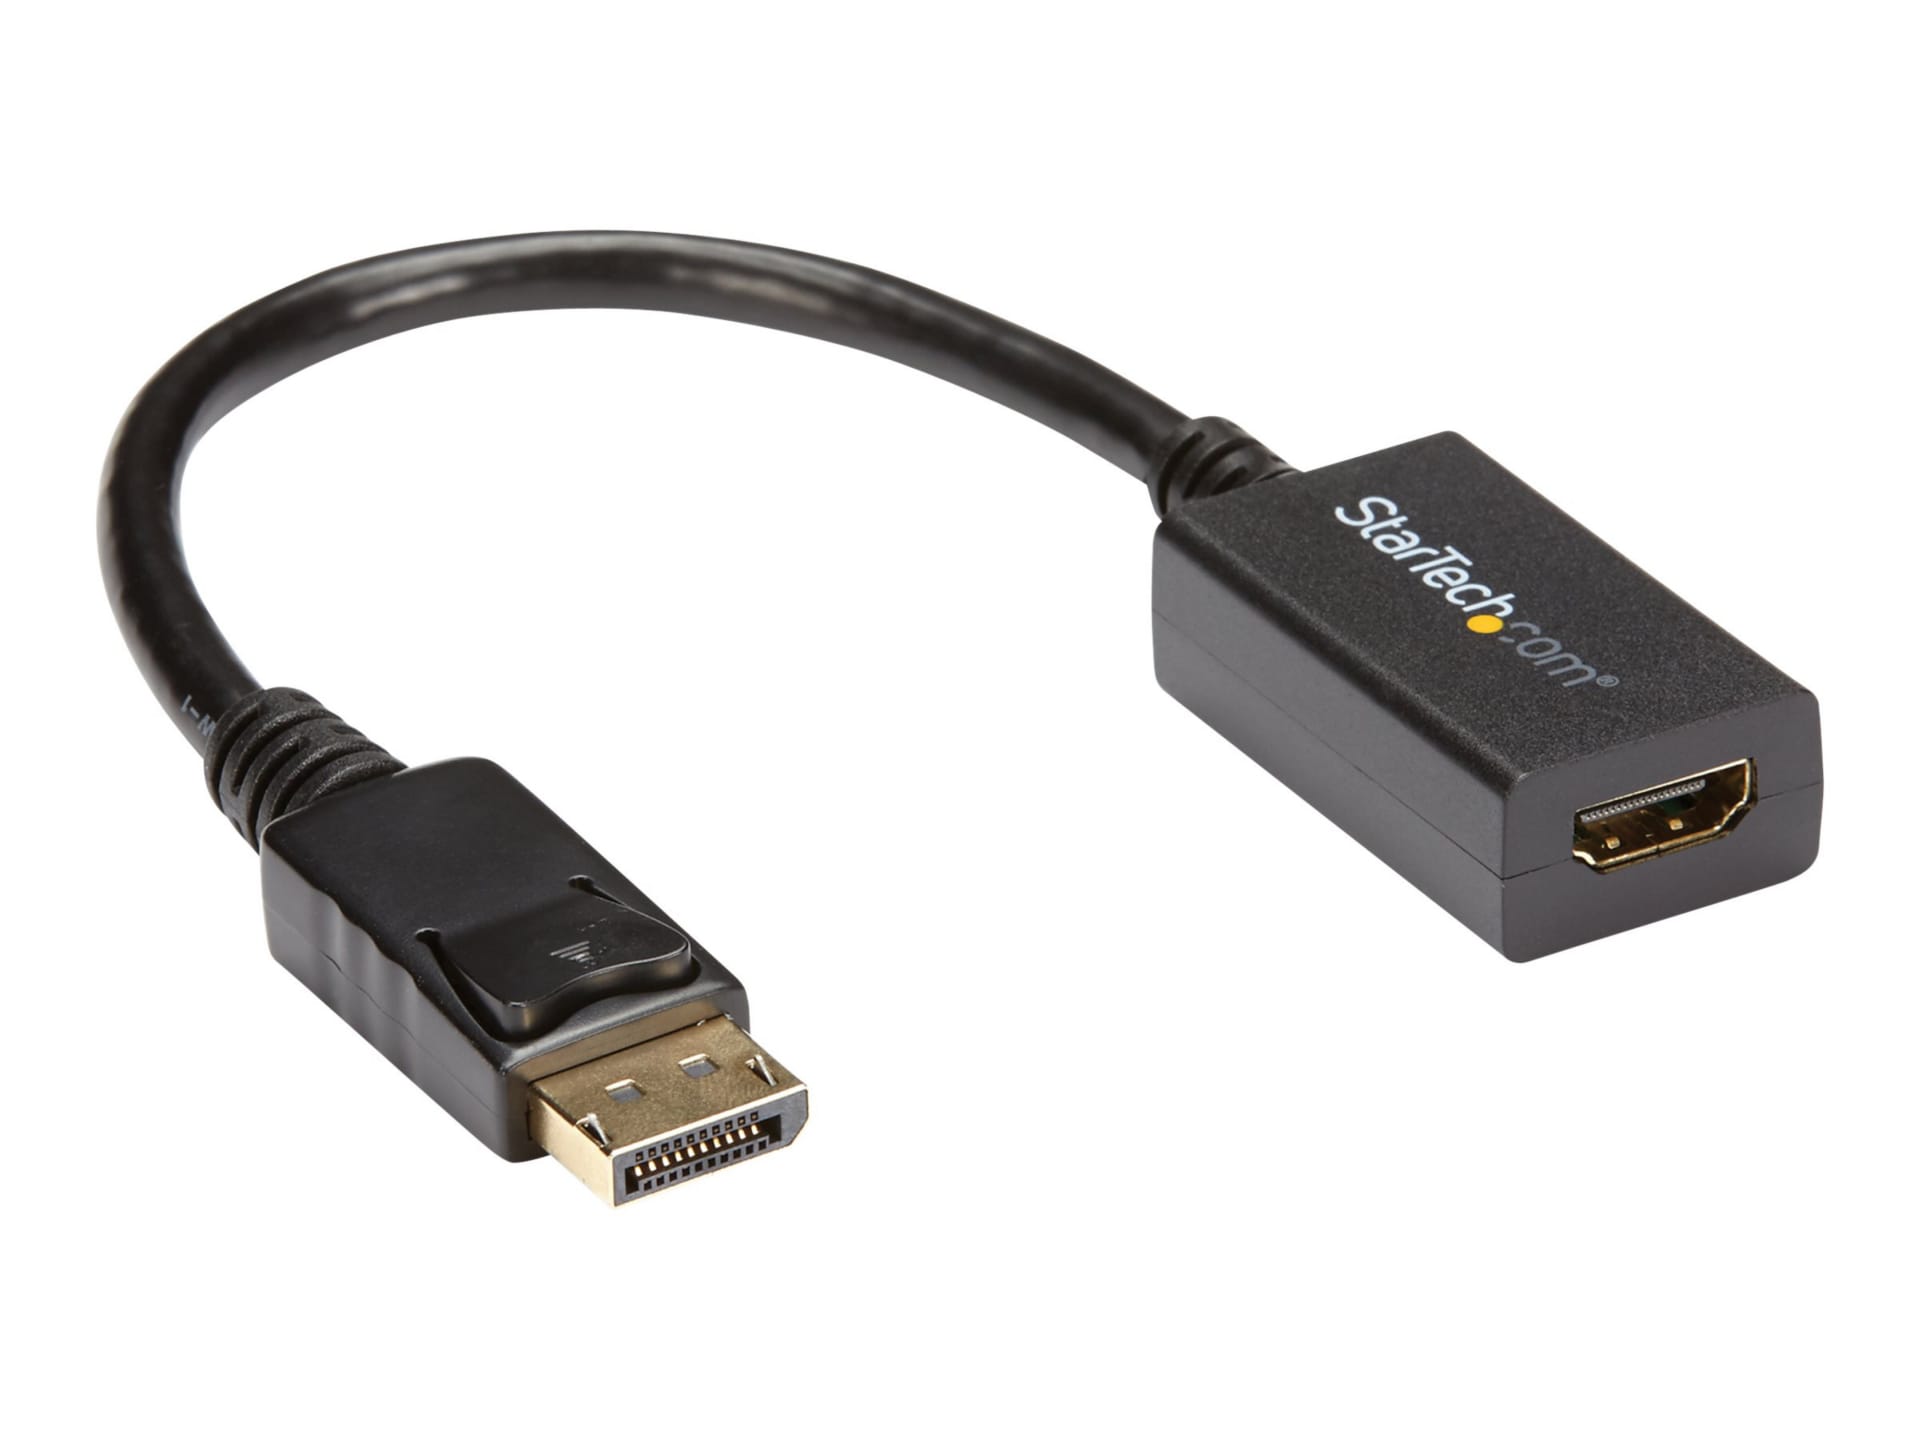 StarTech.com DisplayPort to HDMI Adapter, 1080p DP to HDMI Video Converter, DP to HDMI Monitor/TV Dongle, Passive,